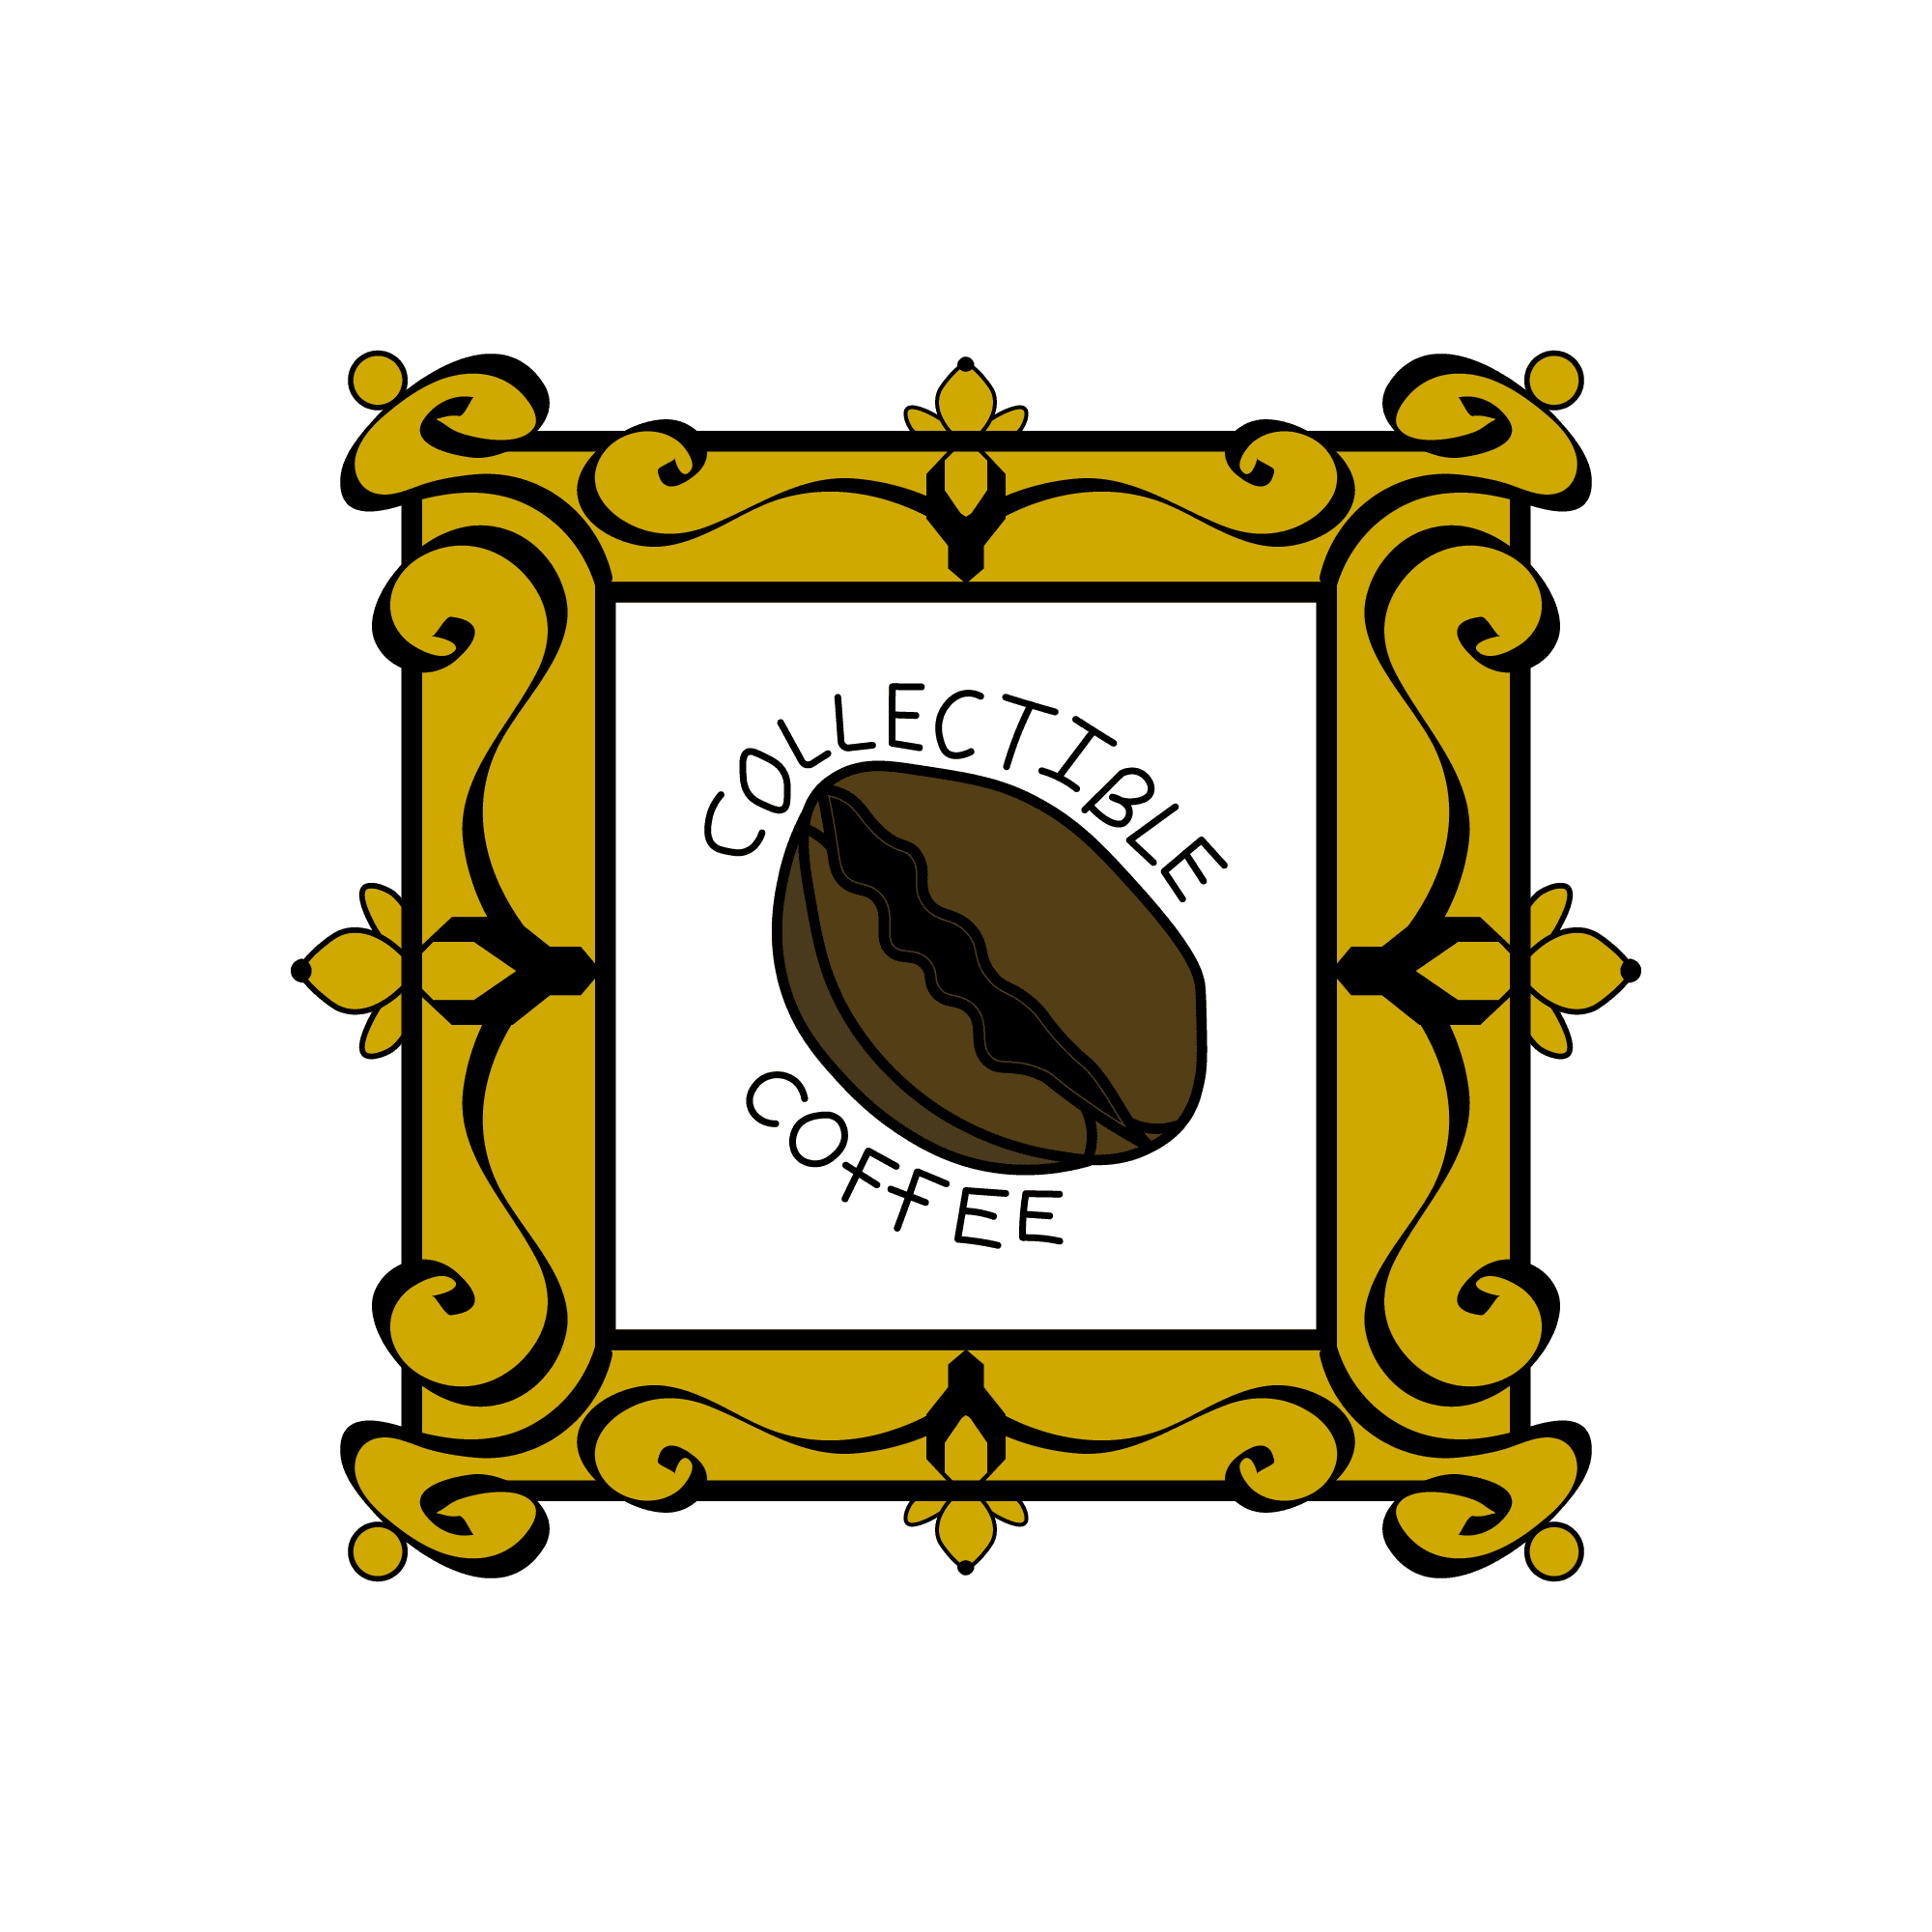 collectiblecoffee